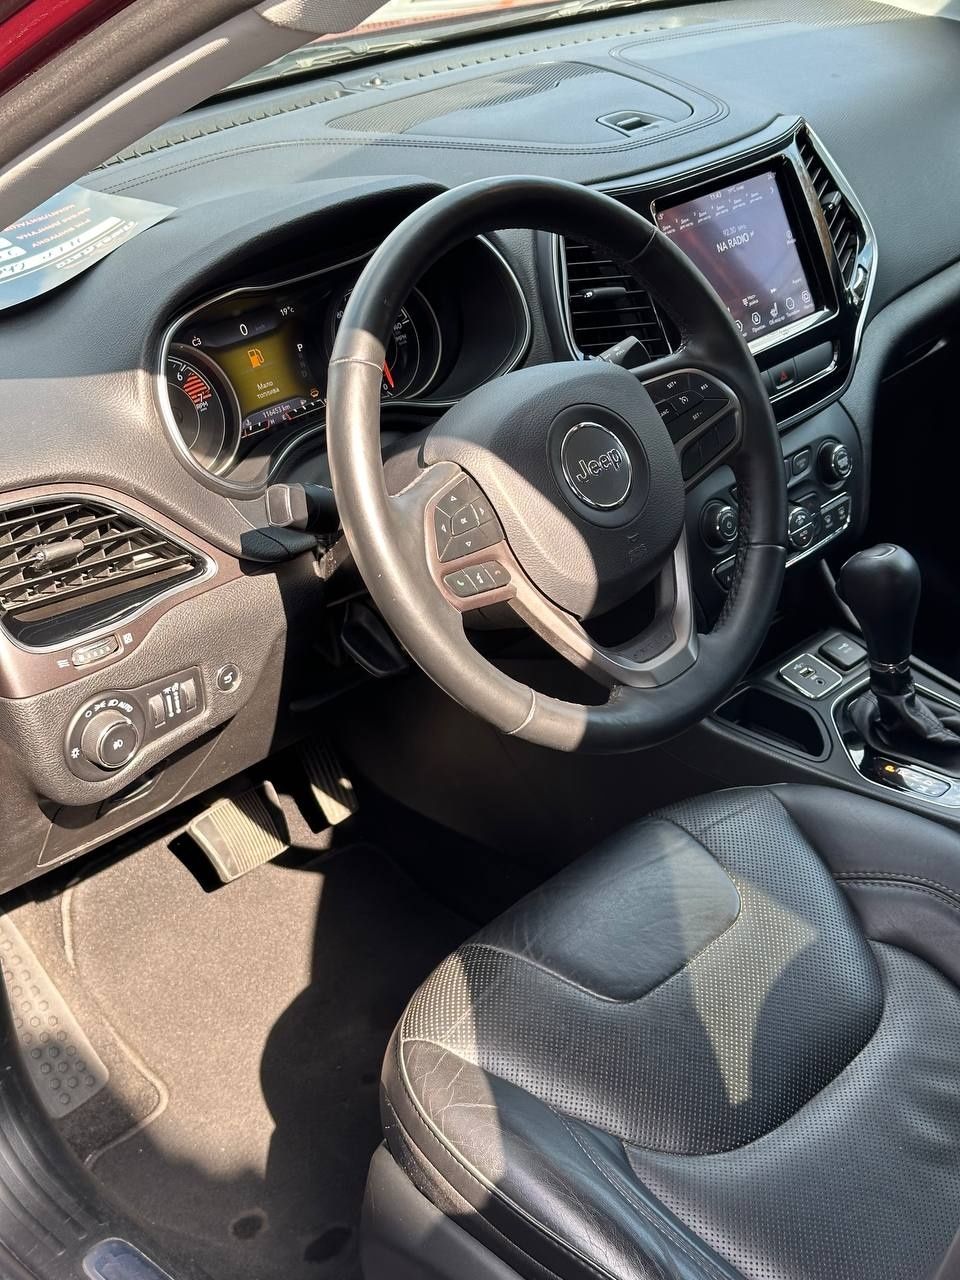 Jeep cherokee kl 2019 limited